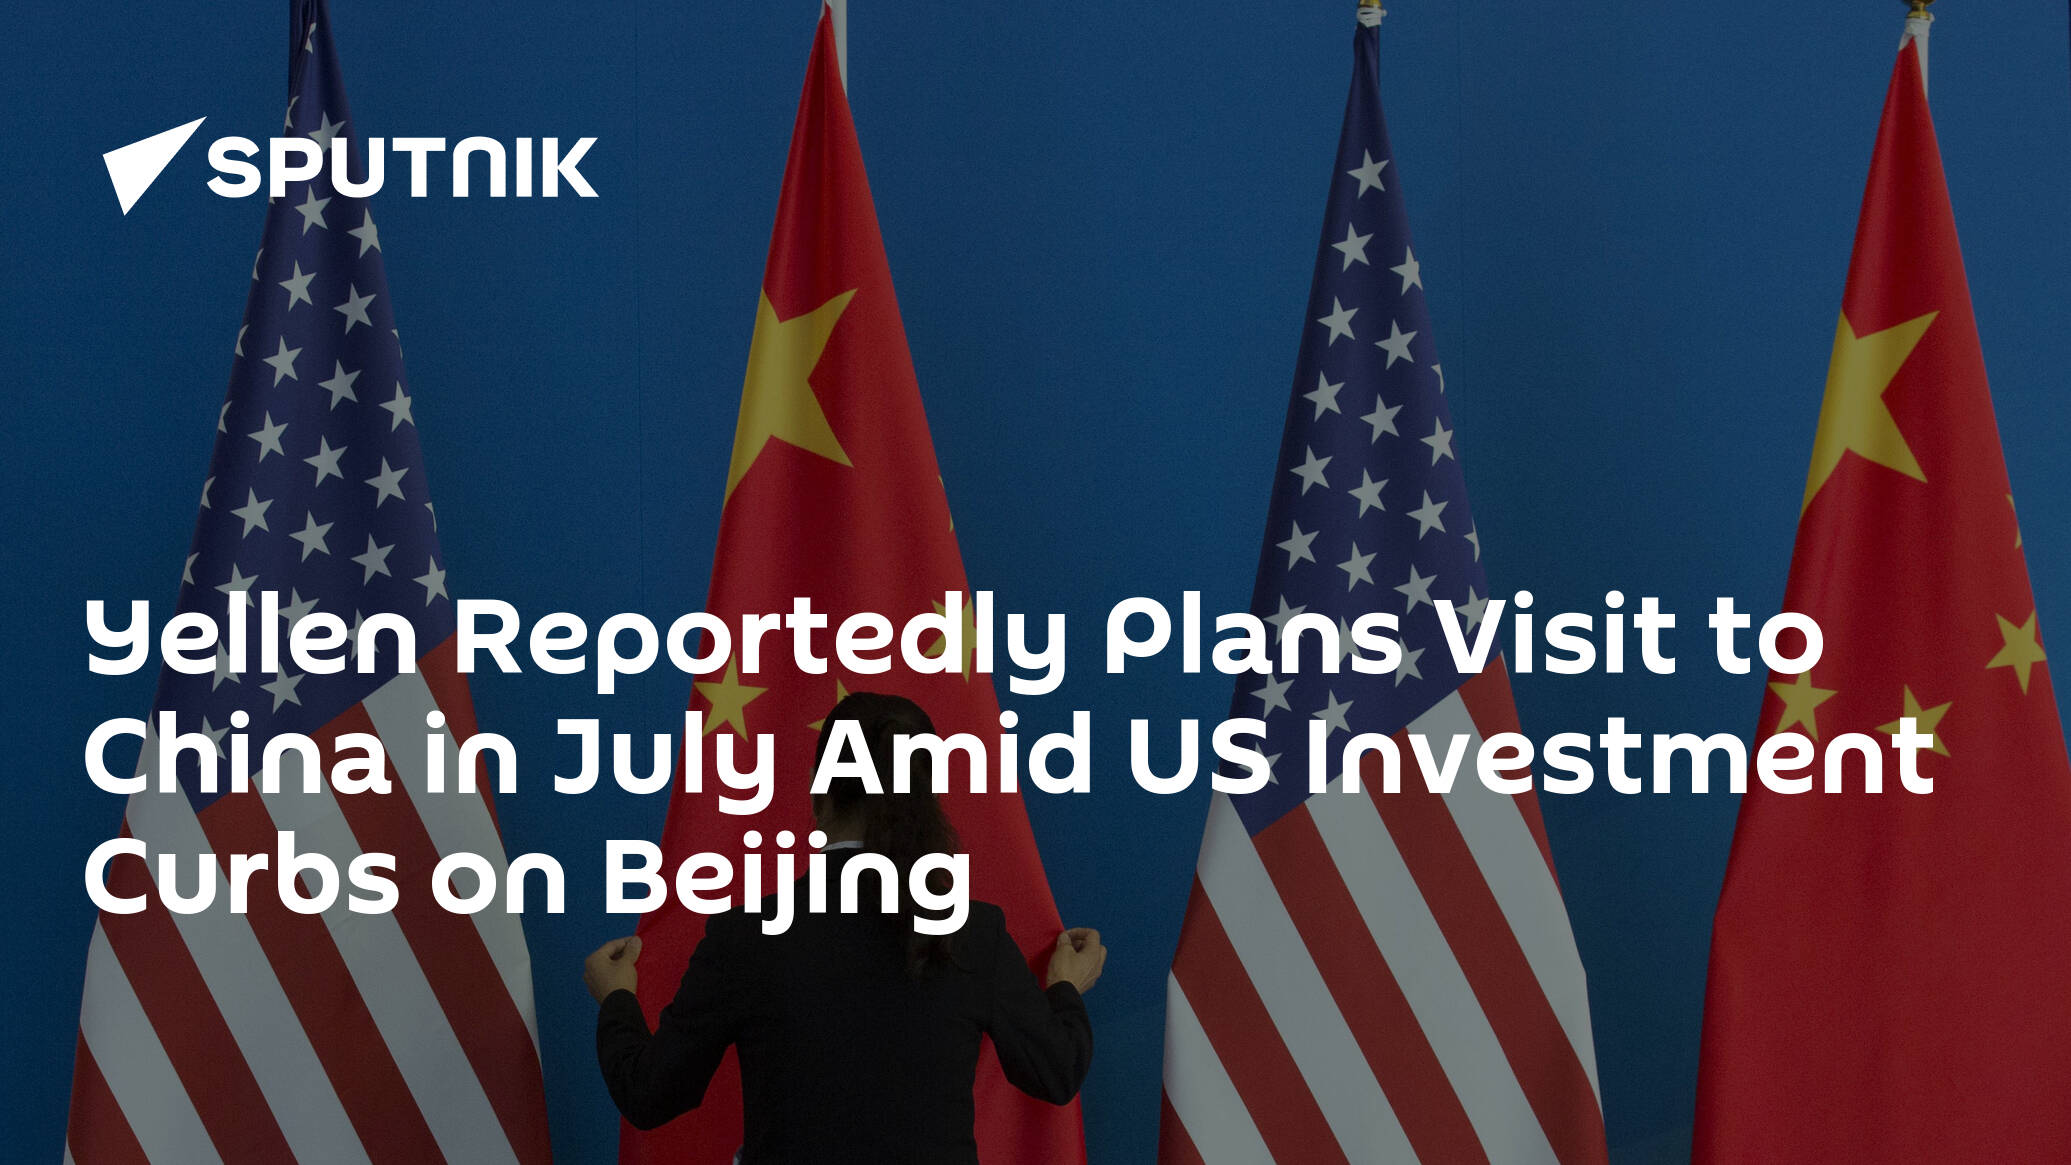 Yellen Reportedly Plans Visit to China in July Amid US Investment Curbs on Beijing